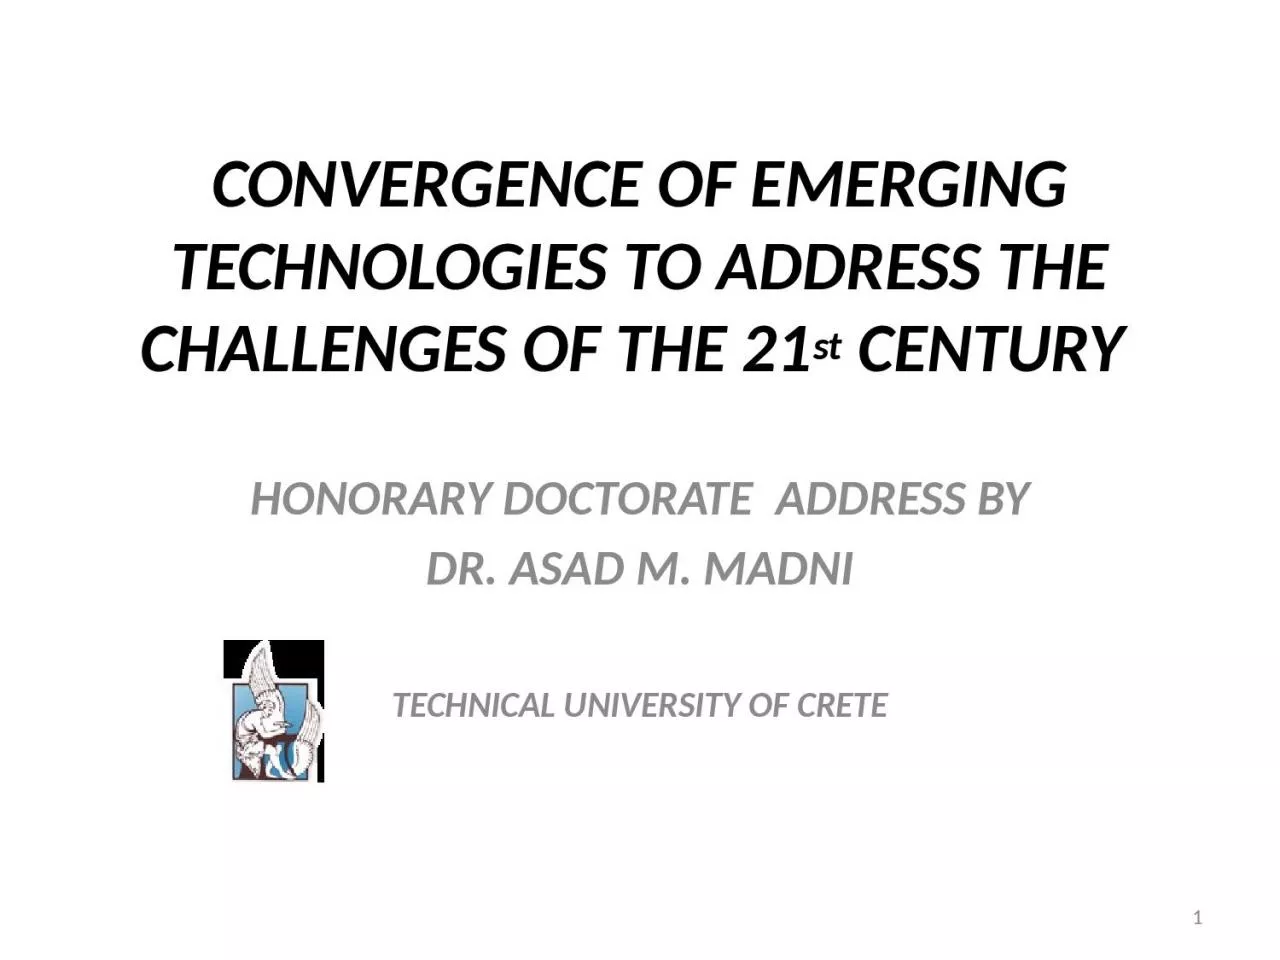 CONVERGENCE OF EMERGING TECHNOLOGIES TO ADDRESS THE CHALLENGES OF THE 21st CENTURY